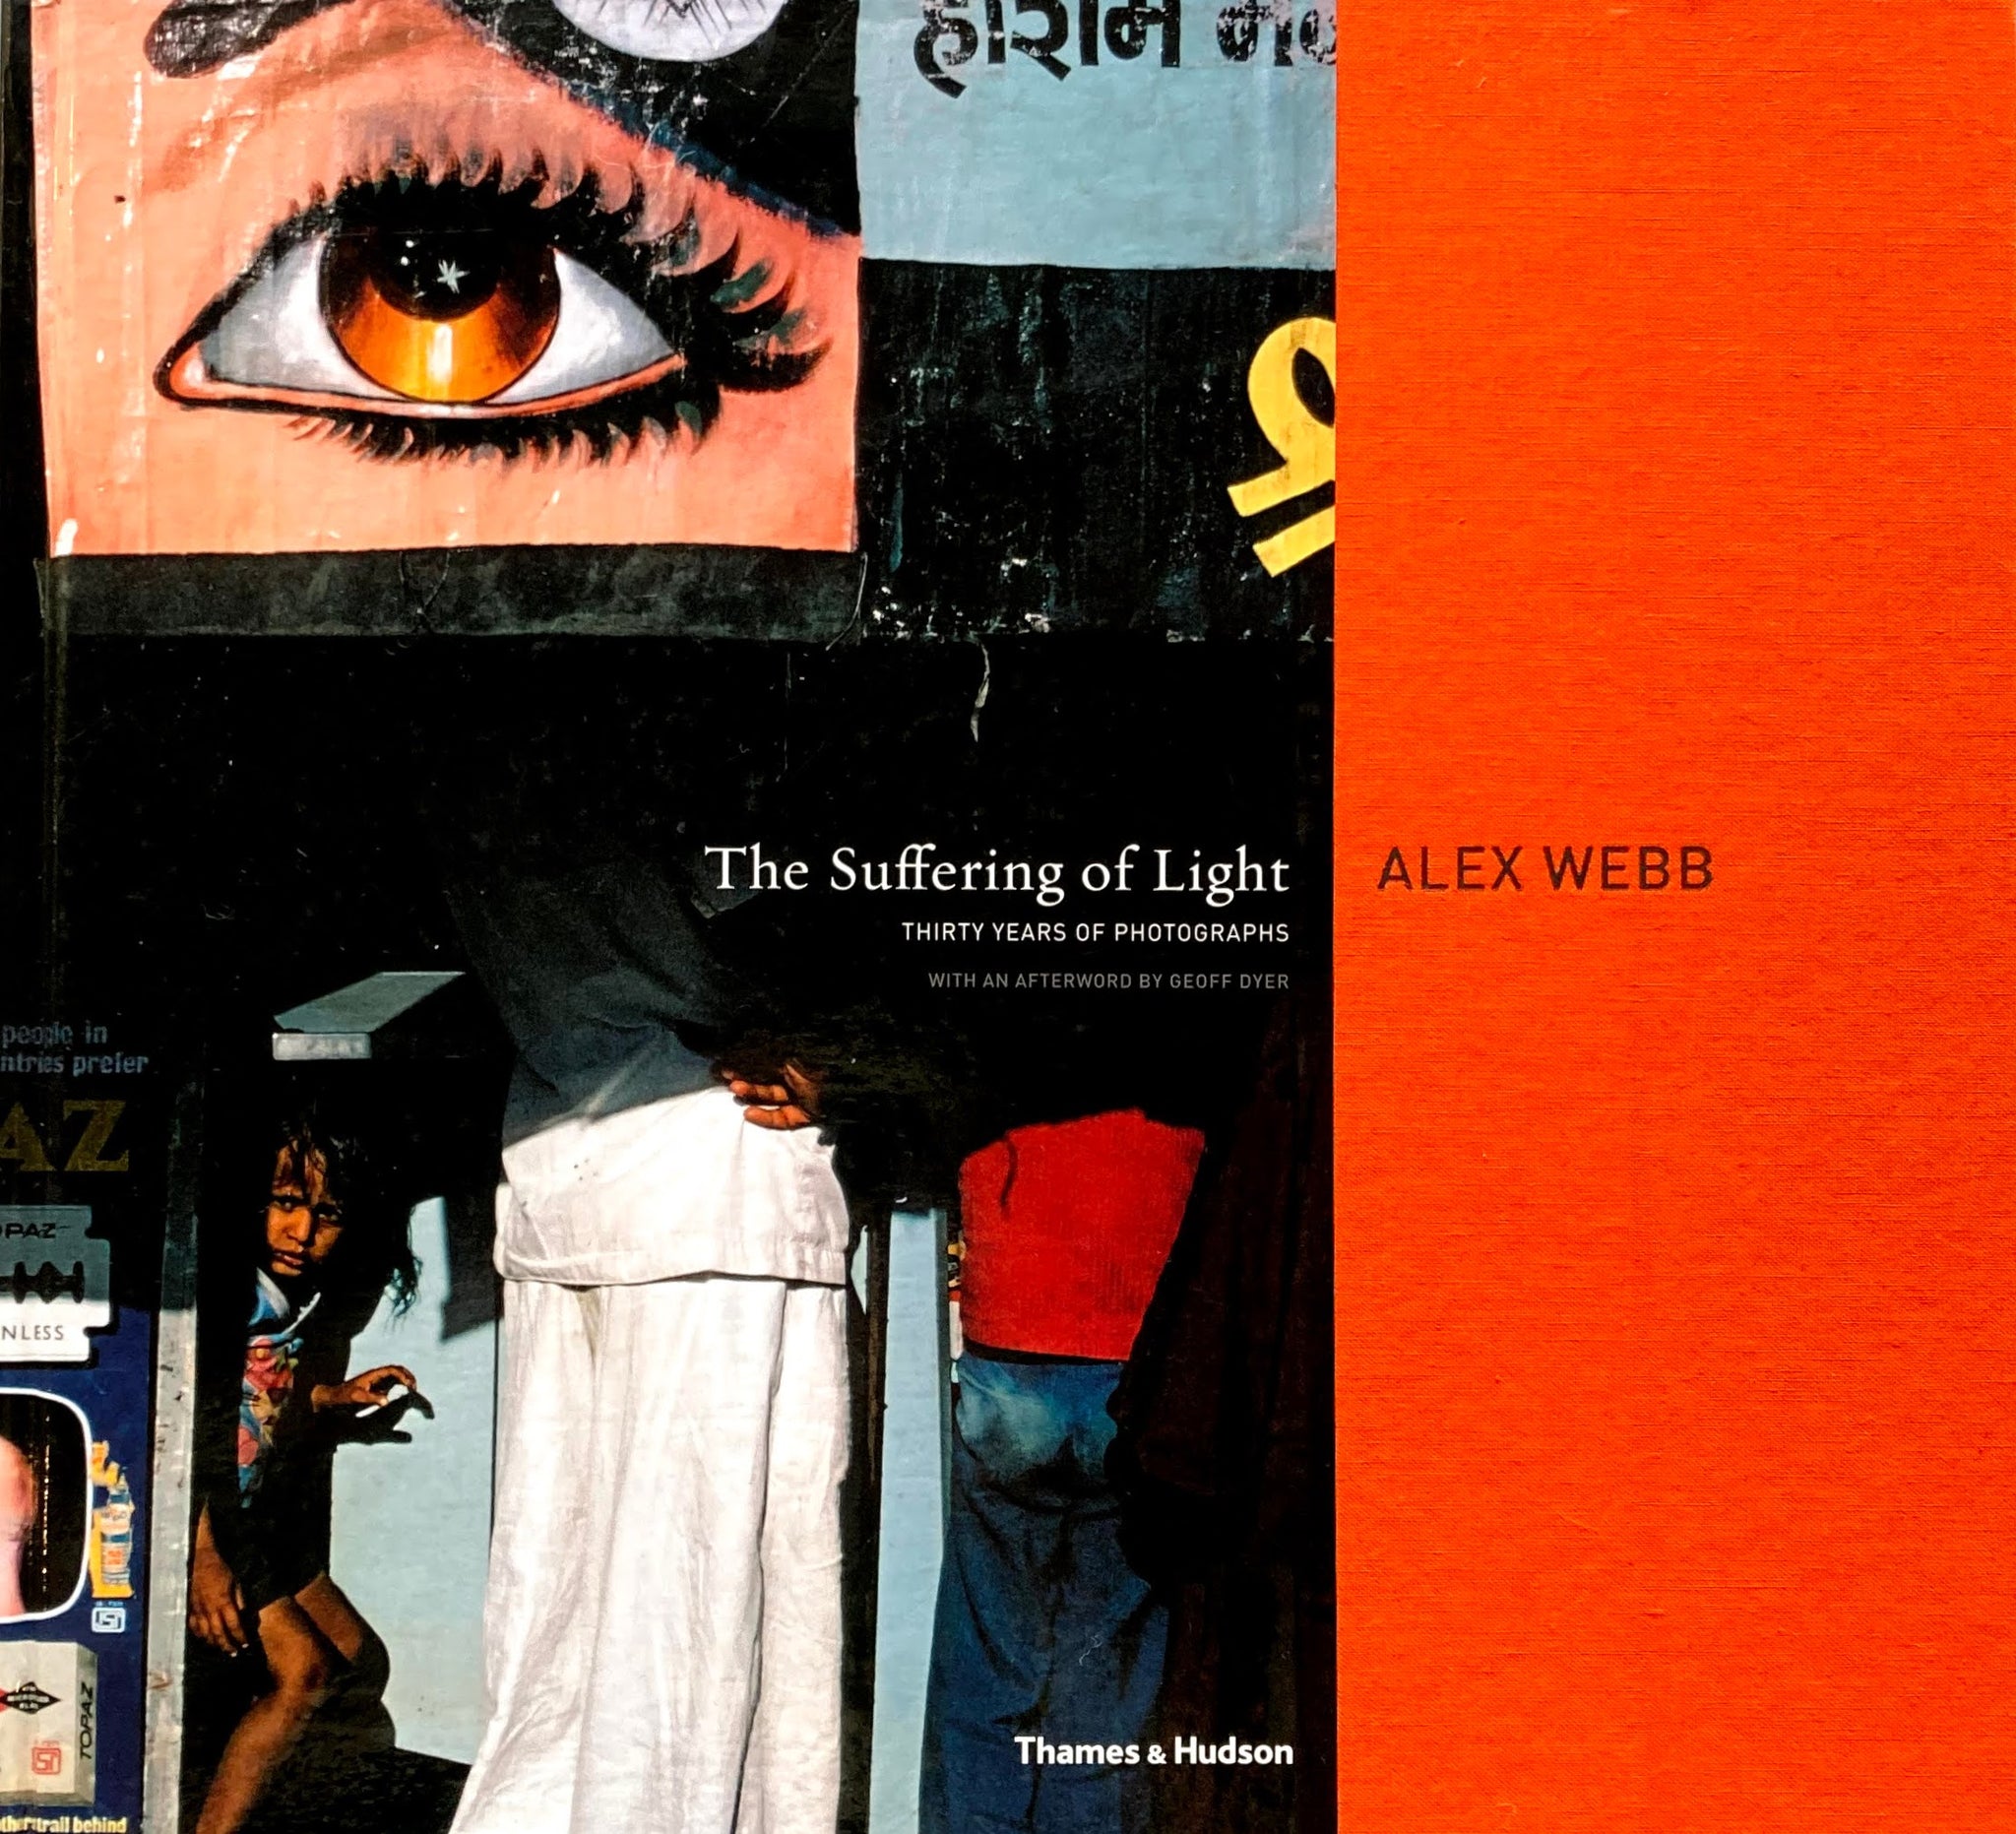 The Suffering Of Light Thirty Years Of Photographs Alex Webb アレックス ウェブ Smokebooks 美術 デザイン 古書店